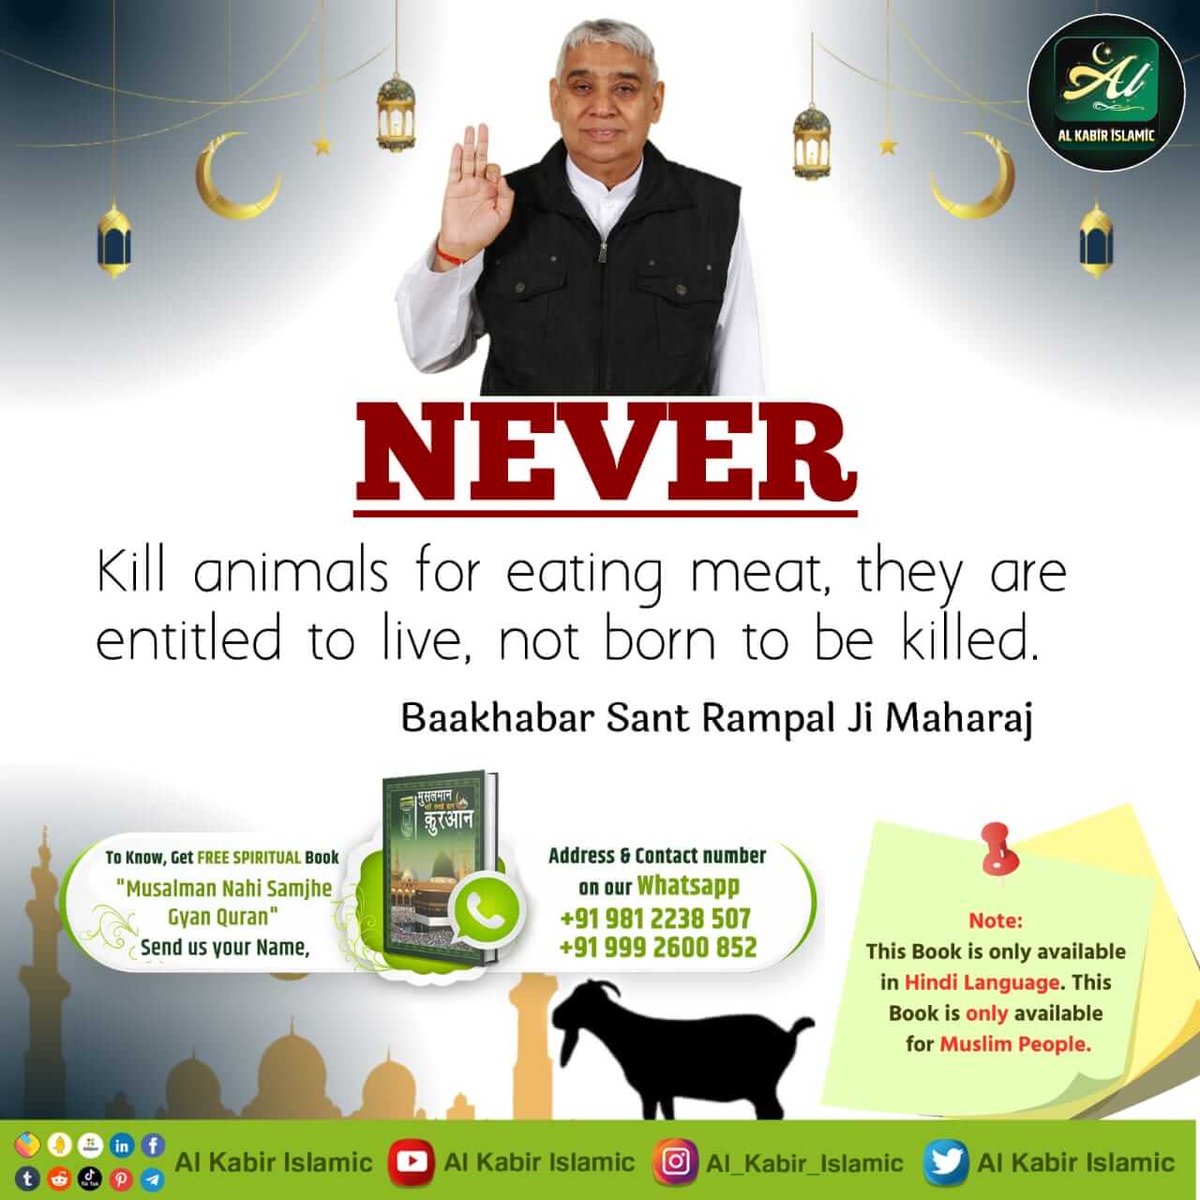 #रहम_करो_मूक_जीवों_पर Never kill animals for eating meat, they are entitled to live, not born to be killed. - Baakhabar Sant Rampal Ji Maharaj